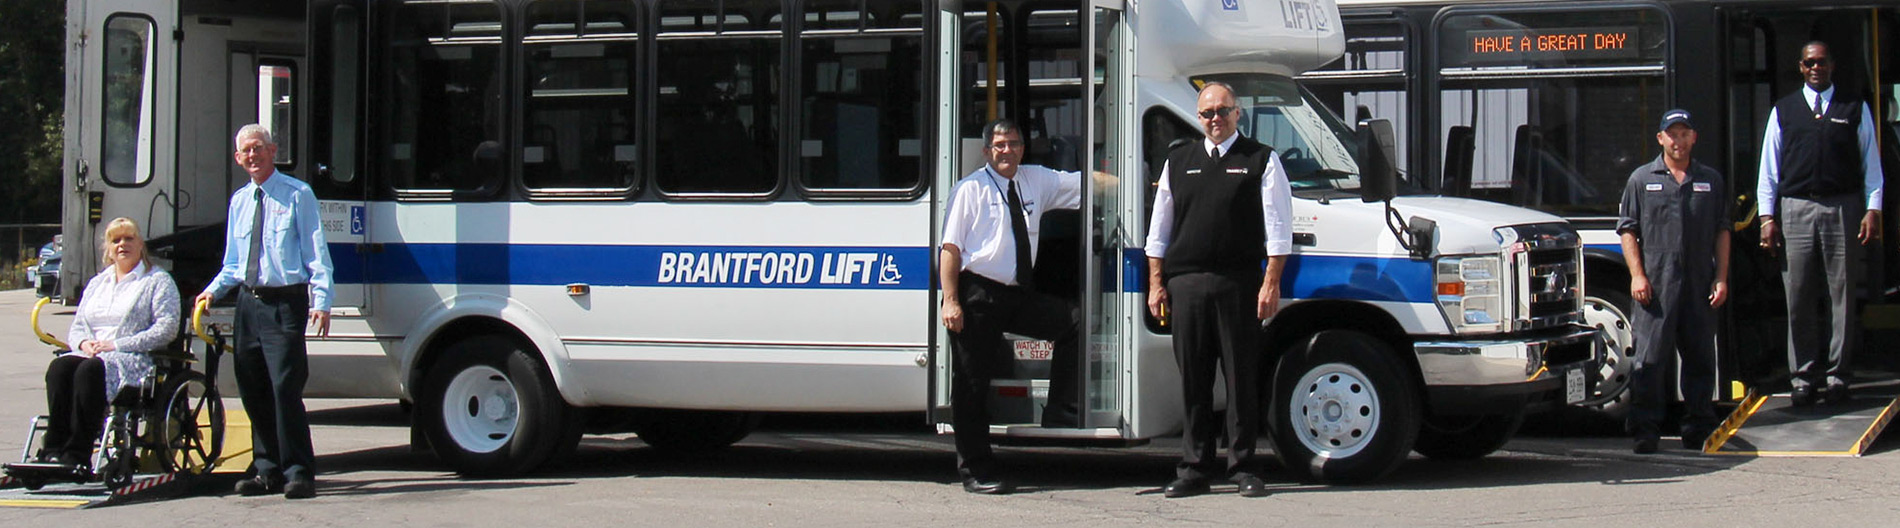 Lift bus with passengers and driver